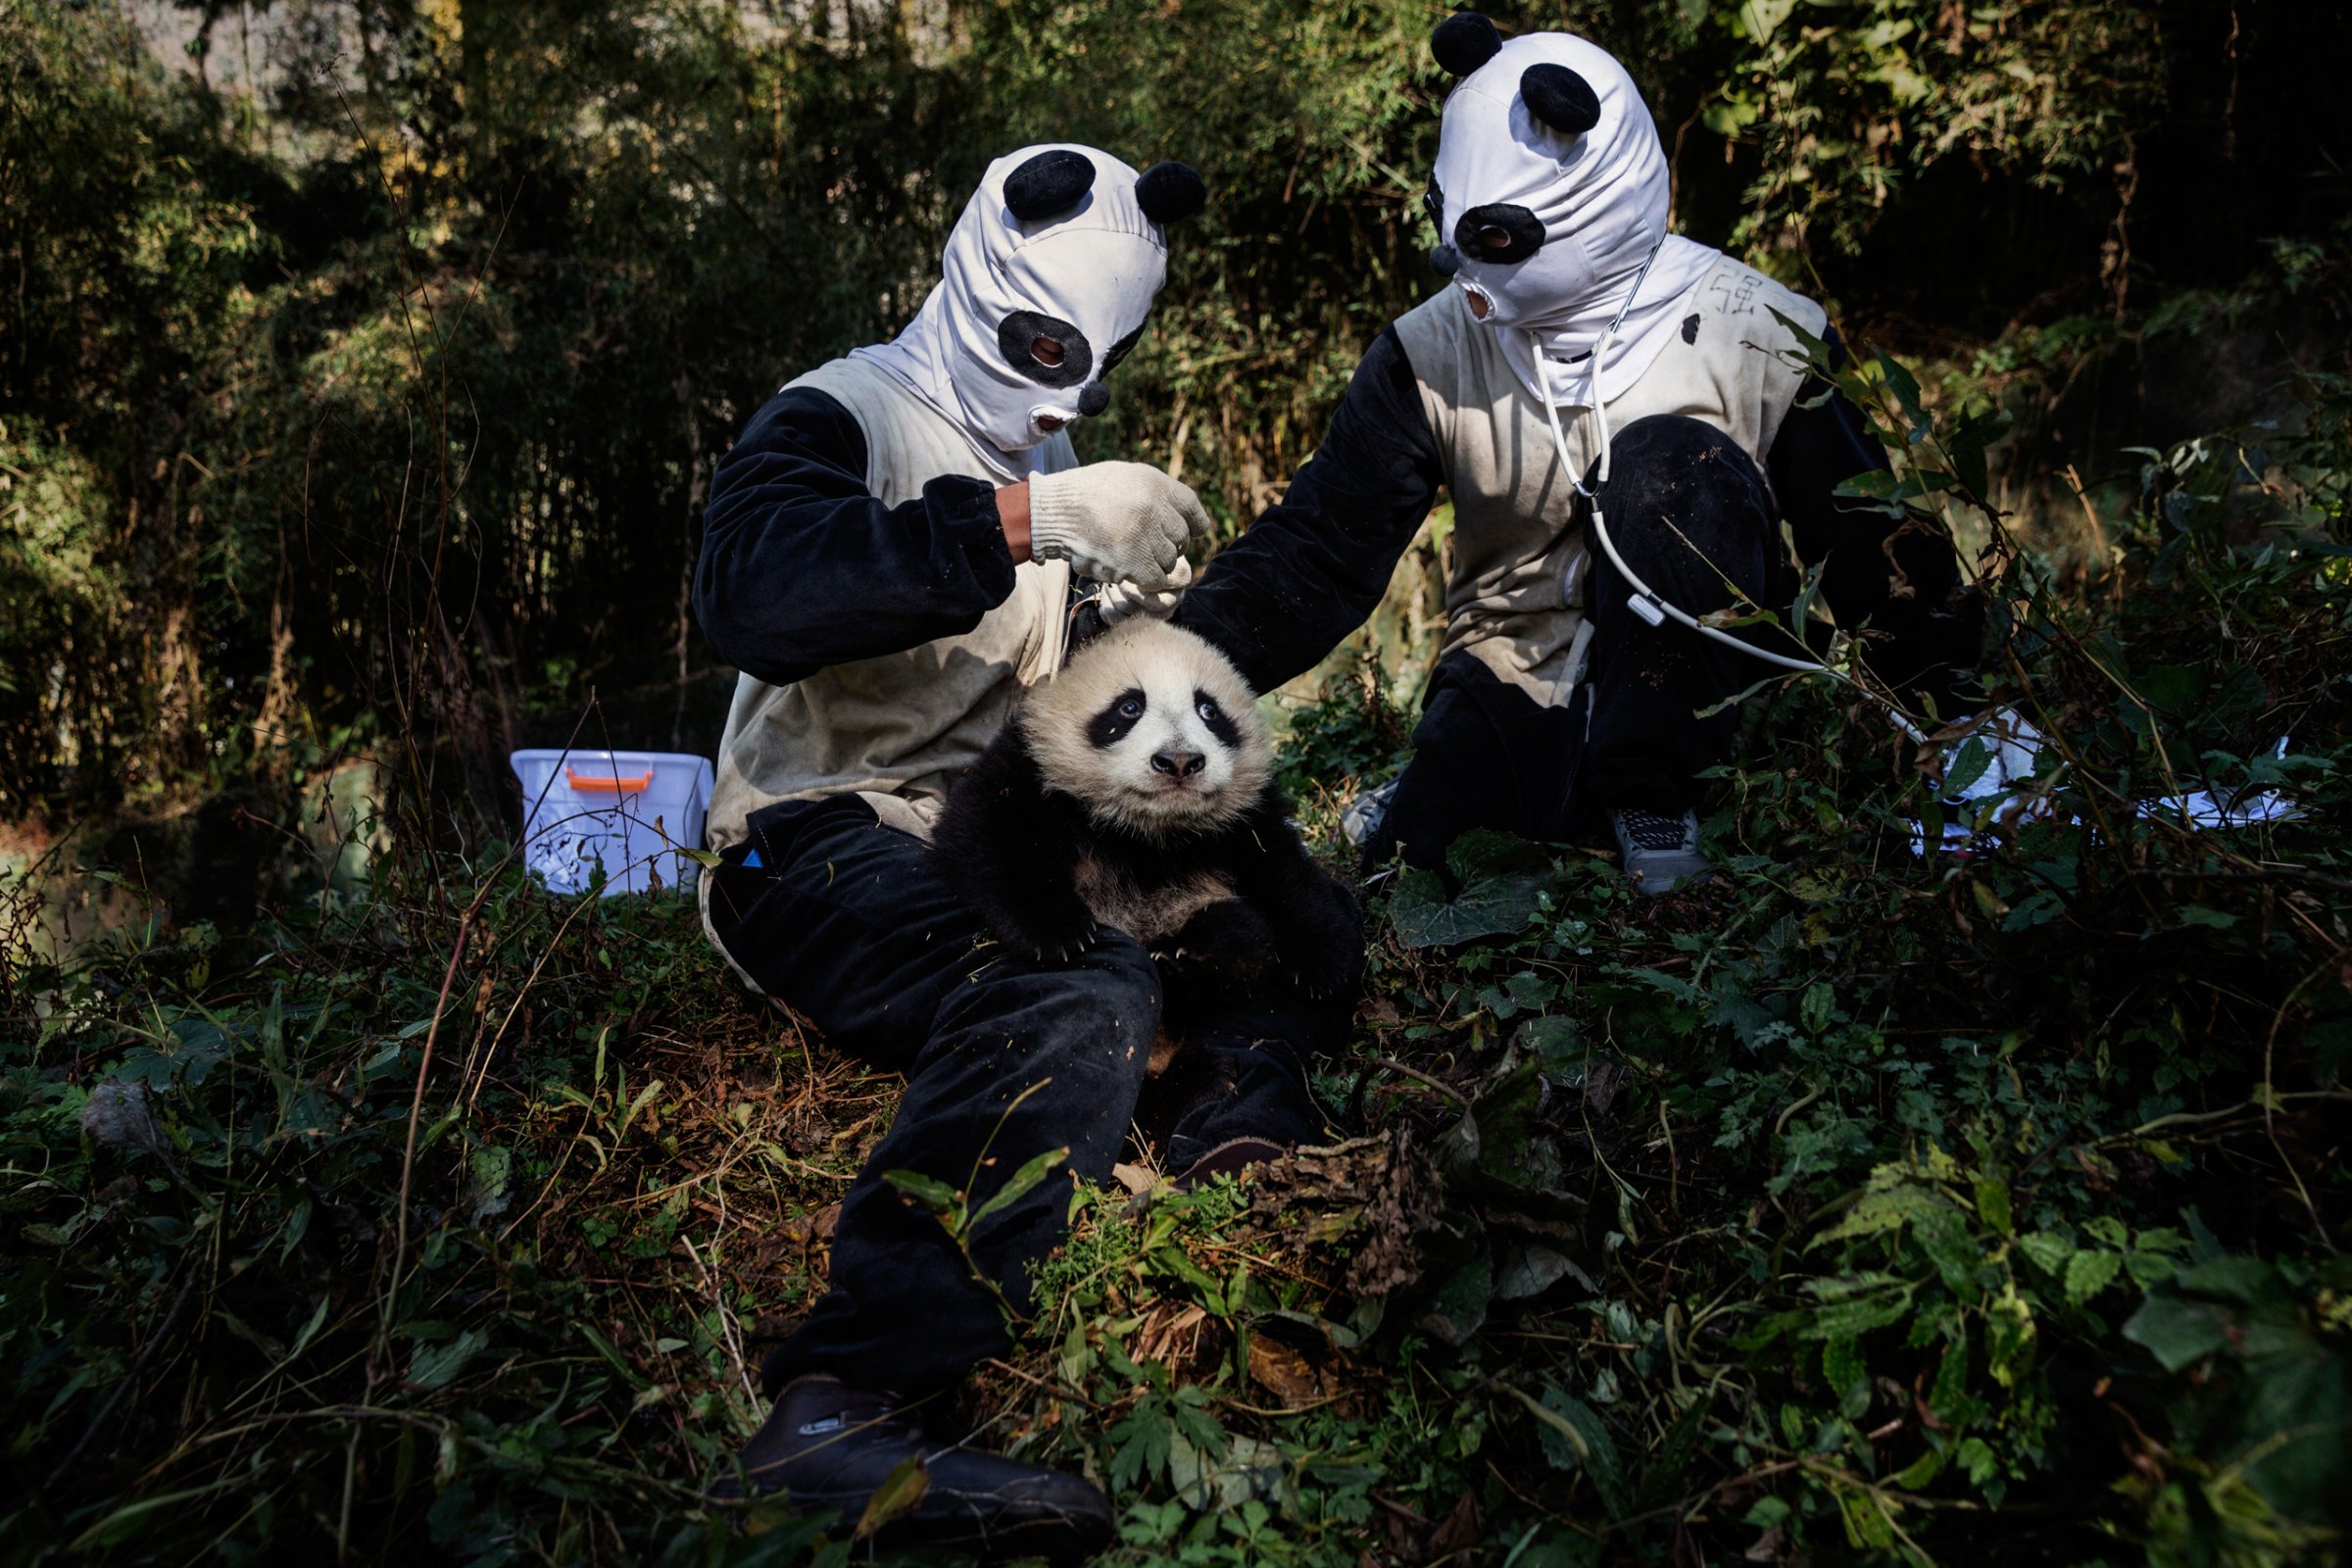 Dressed in panda costumes, researchers in Wolong, the home of China’s panda-conservation efforts, check a 4-month-old female cub